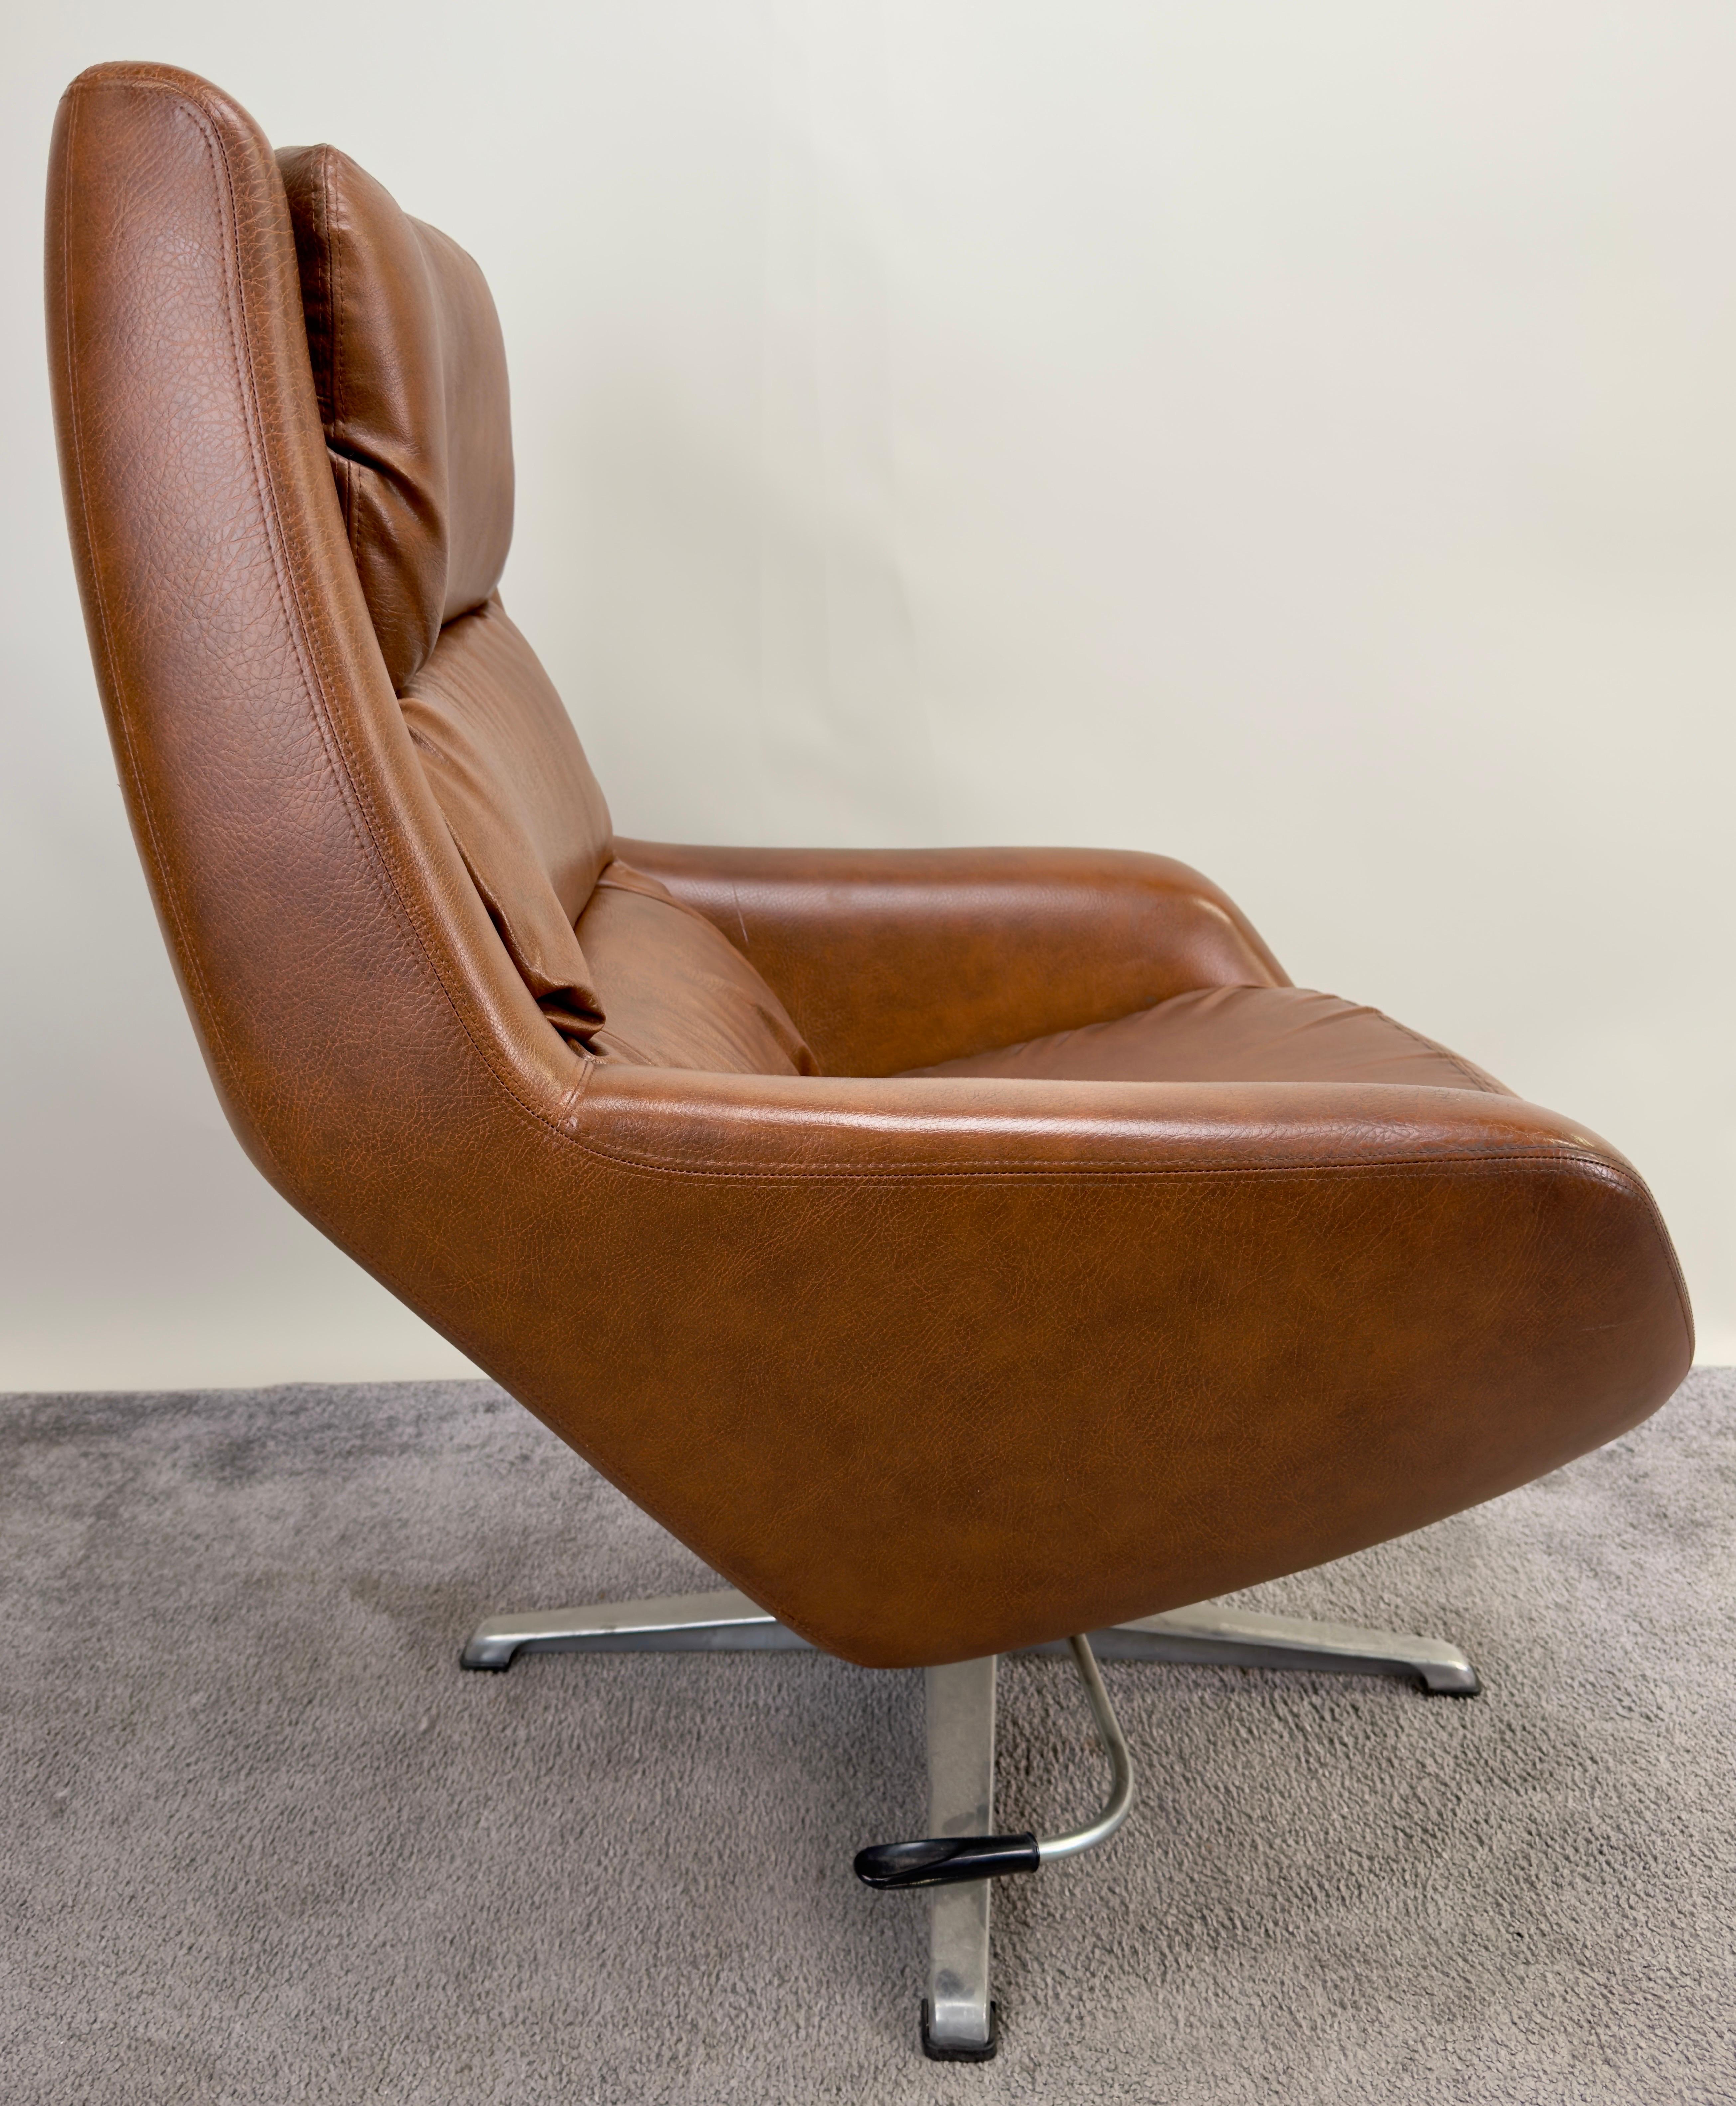 20th Century Swedish Mid Century Modern Brown Faux Leather Lounge Chair & Ottoman For Sale